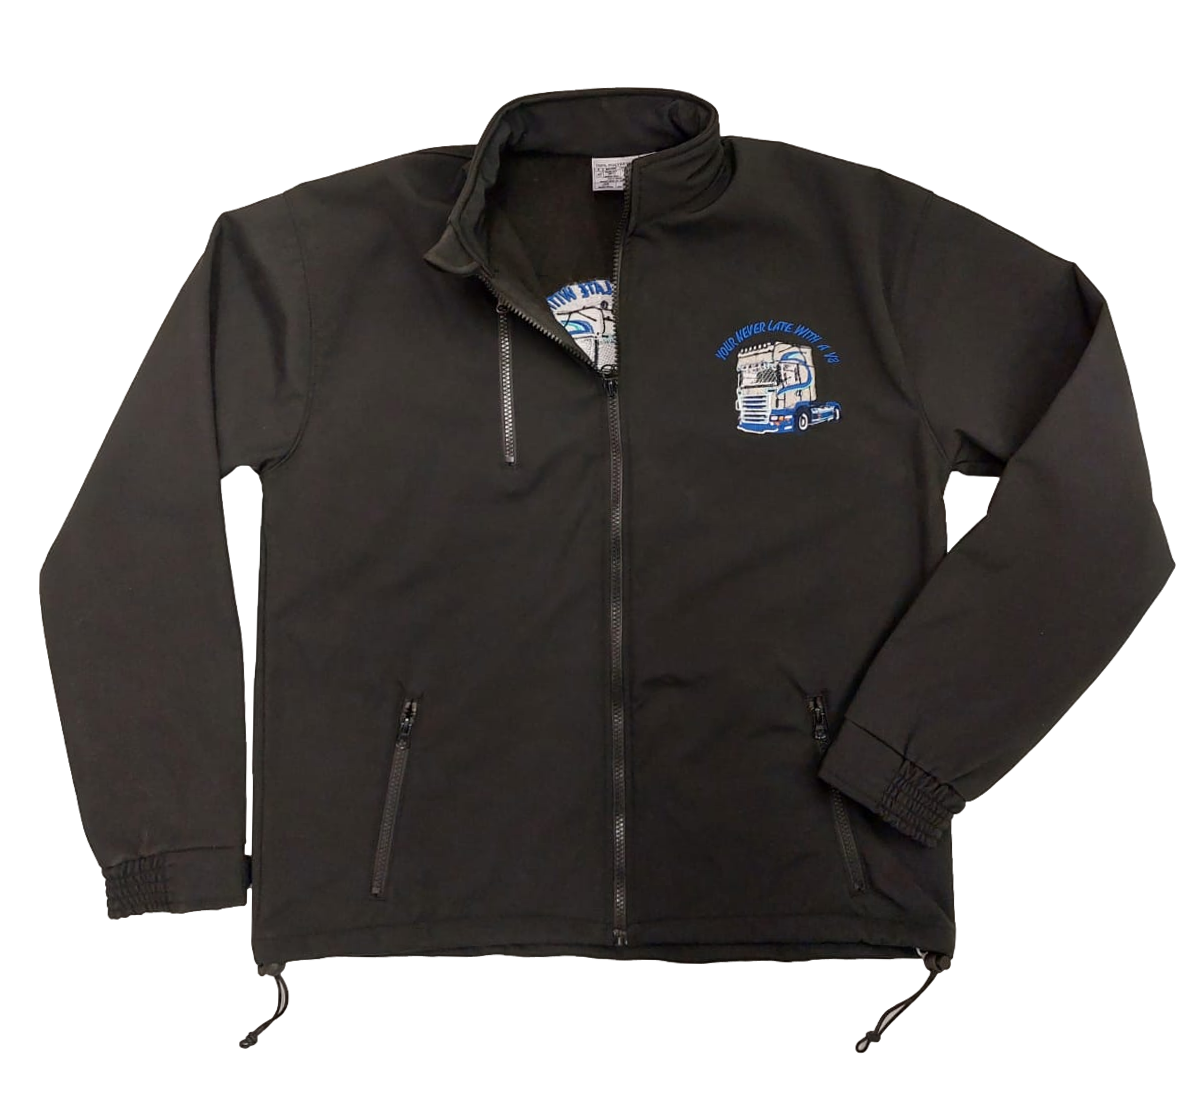 Lorry Embroidered Adults Softshell Jacket